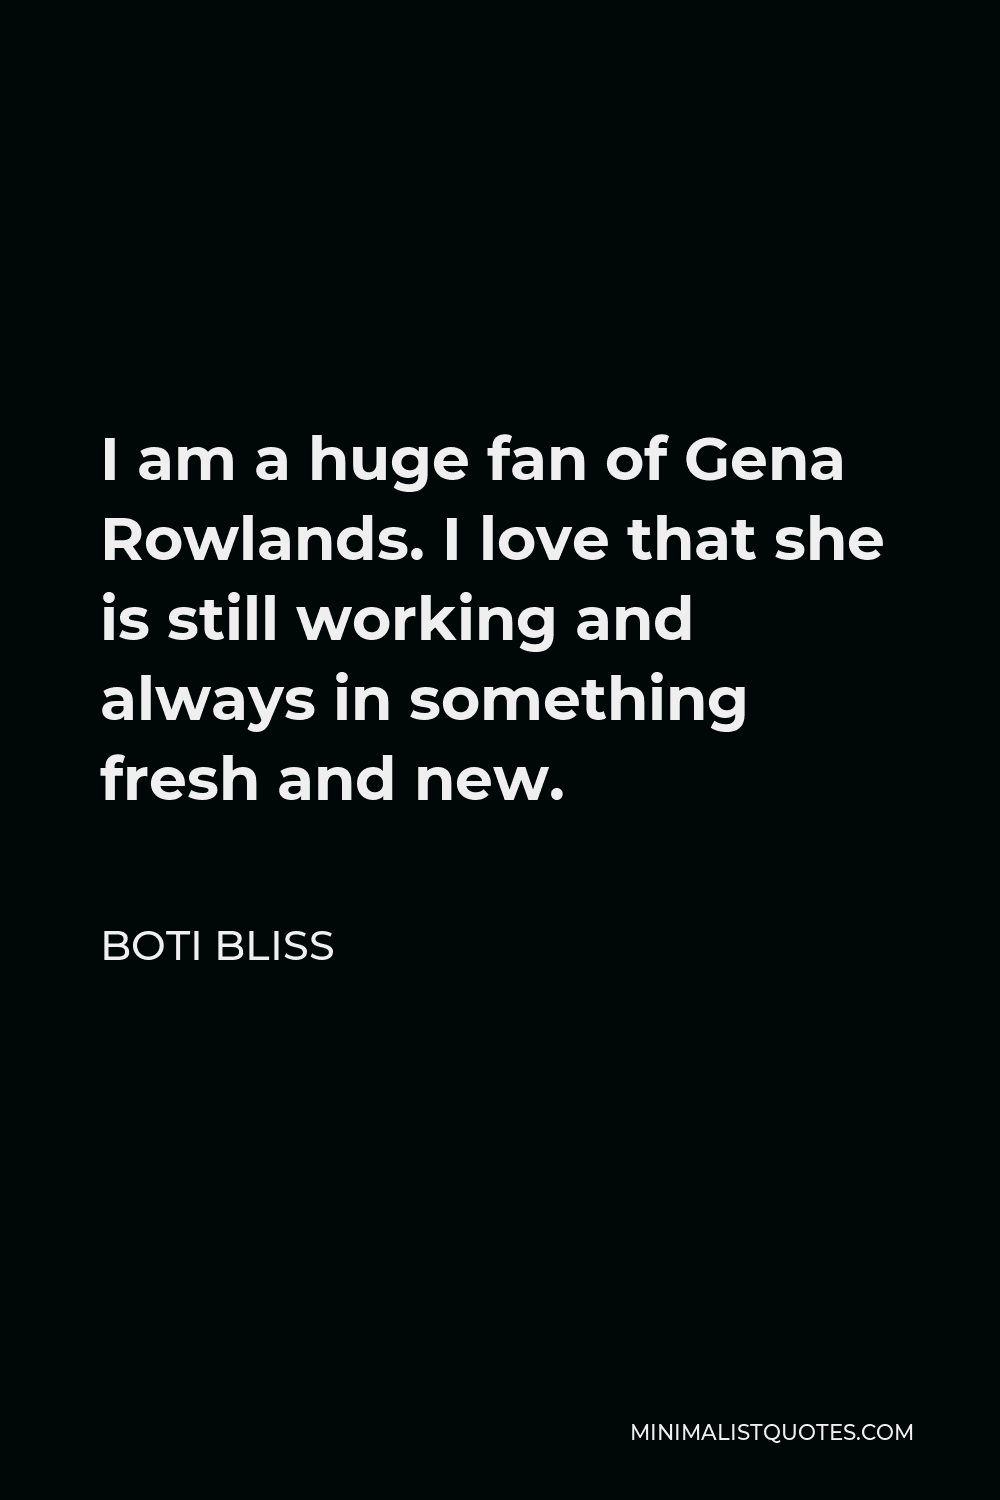 Boti Bliss Quote - I am a huge fan of Gena Rowlands. I love that she is still working and always in something fresh and new.